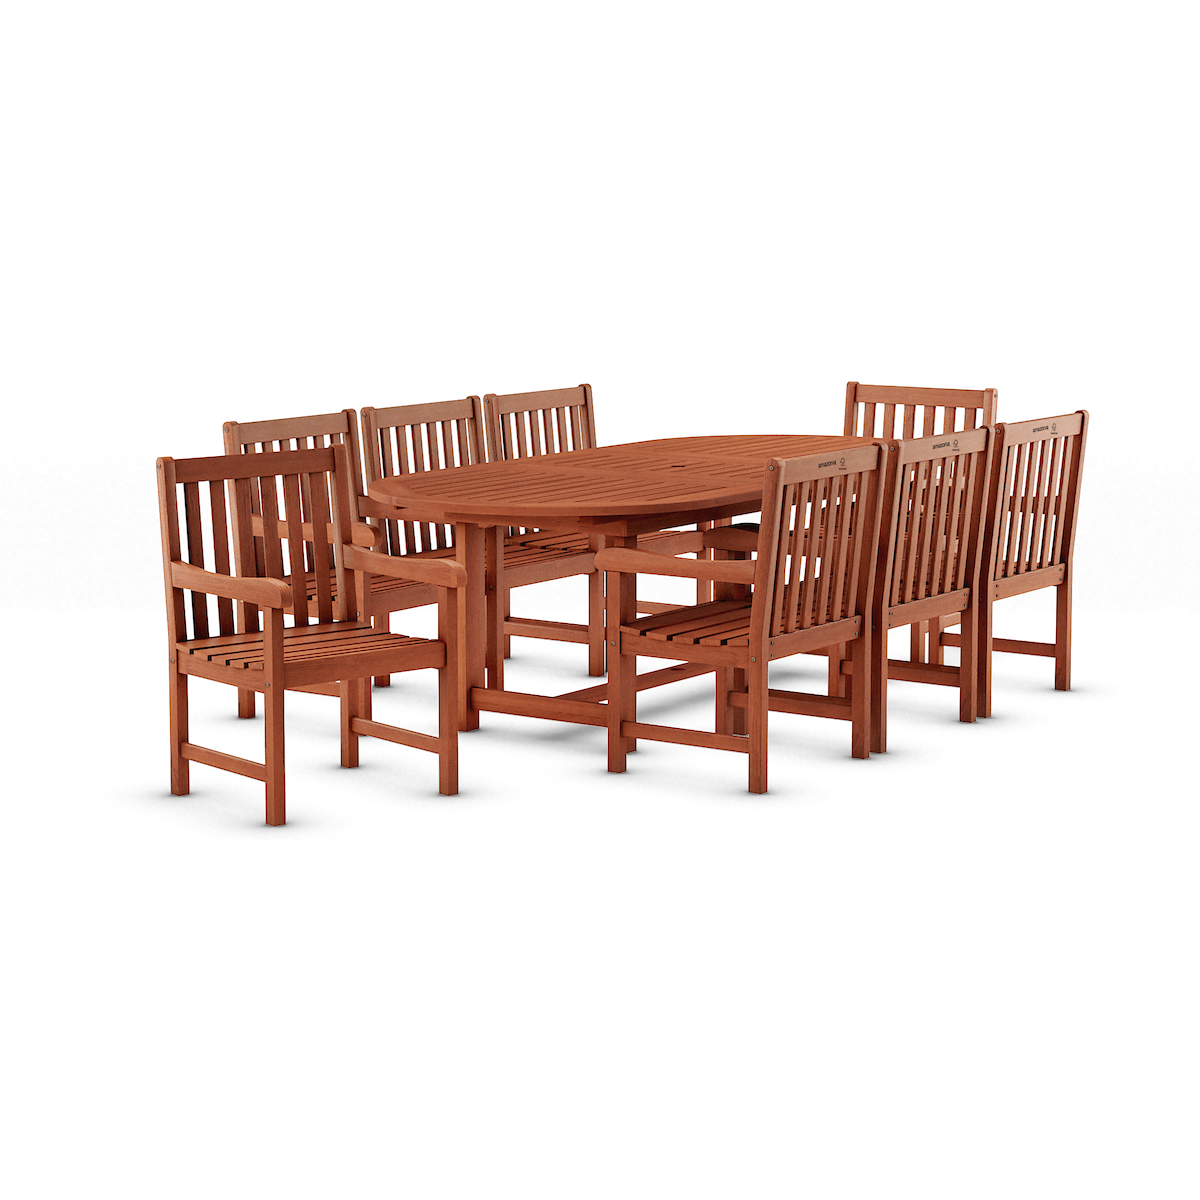 Amazonia Milano 9-Piece Oval Extendable Patio Dining Set, Eucalyptus Wood, Ideal for Outdoors and Indoors - image 2 of 11